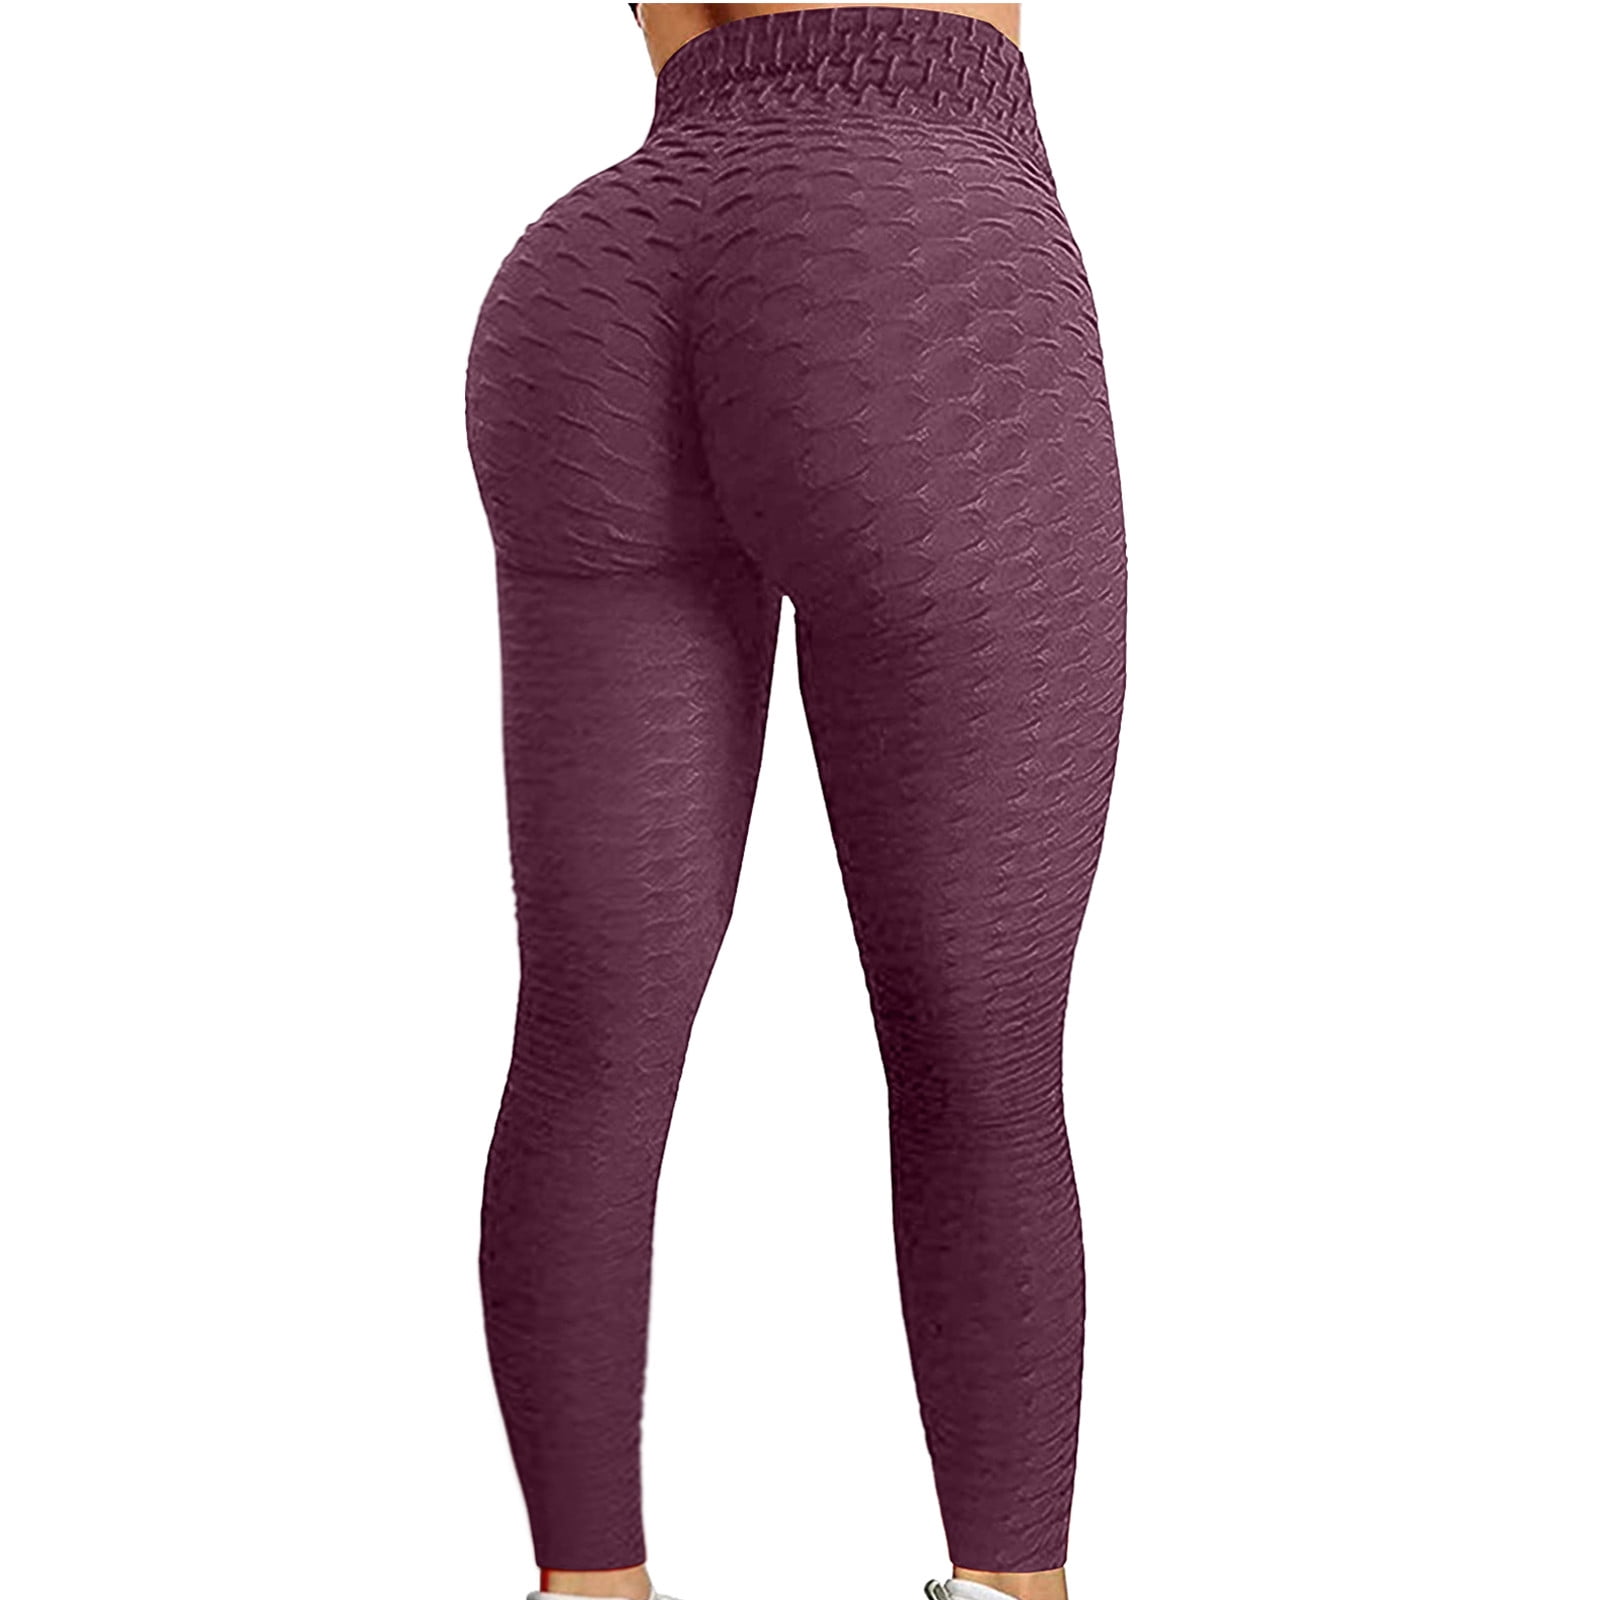 Gubotare Yoga Pants For Women Womens Flare Yoga Pants High Waisted Foldover  Workout Leggings with Pockets,Pink 3XL